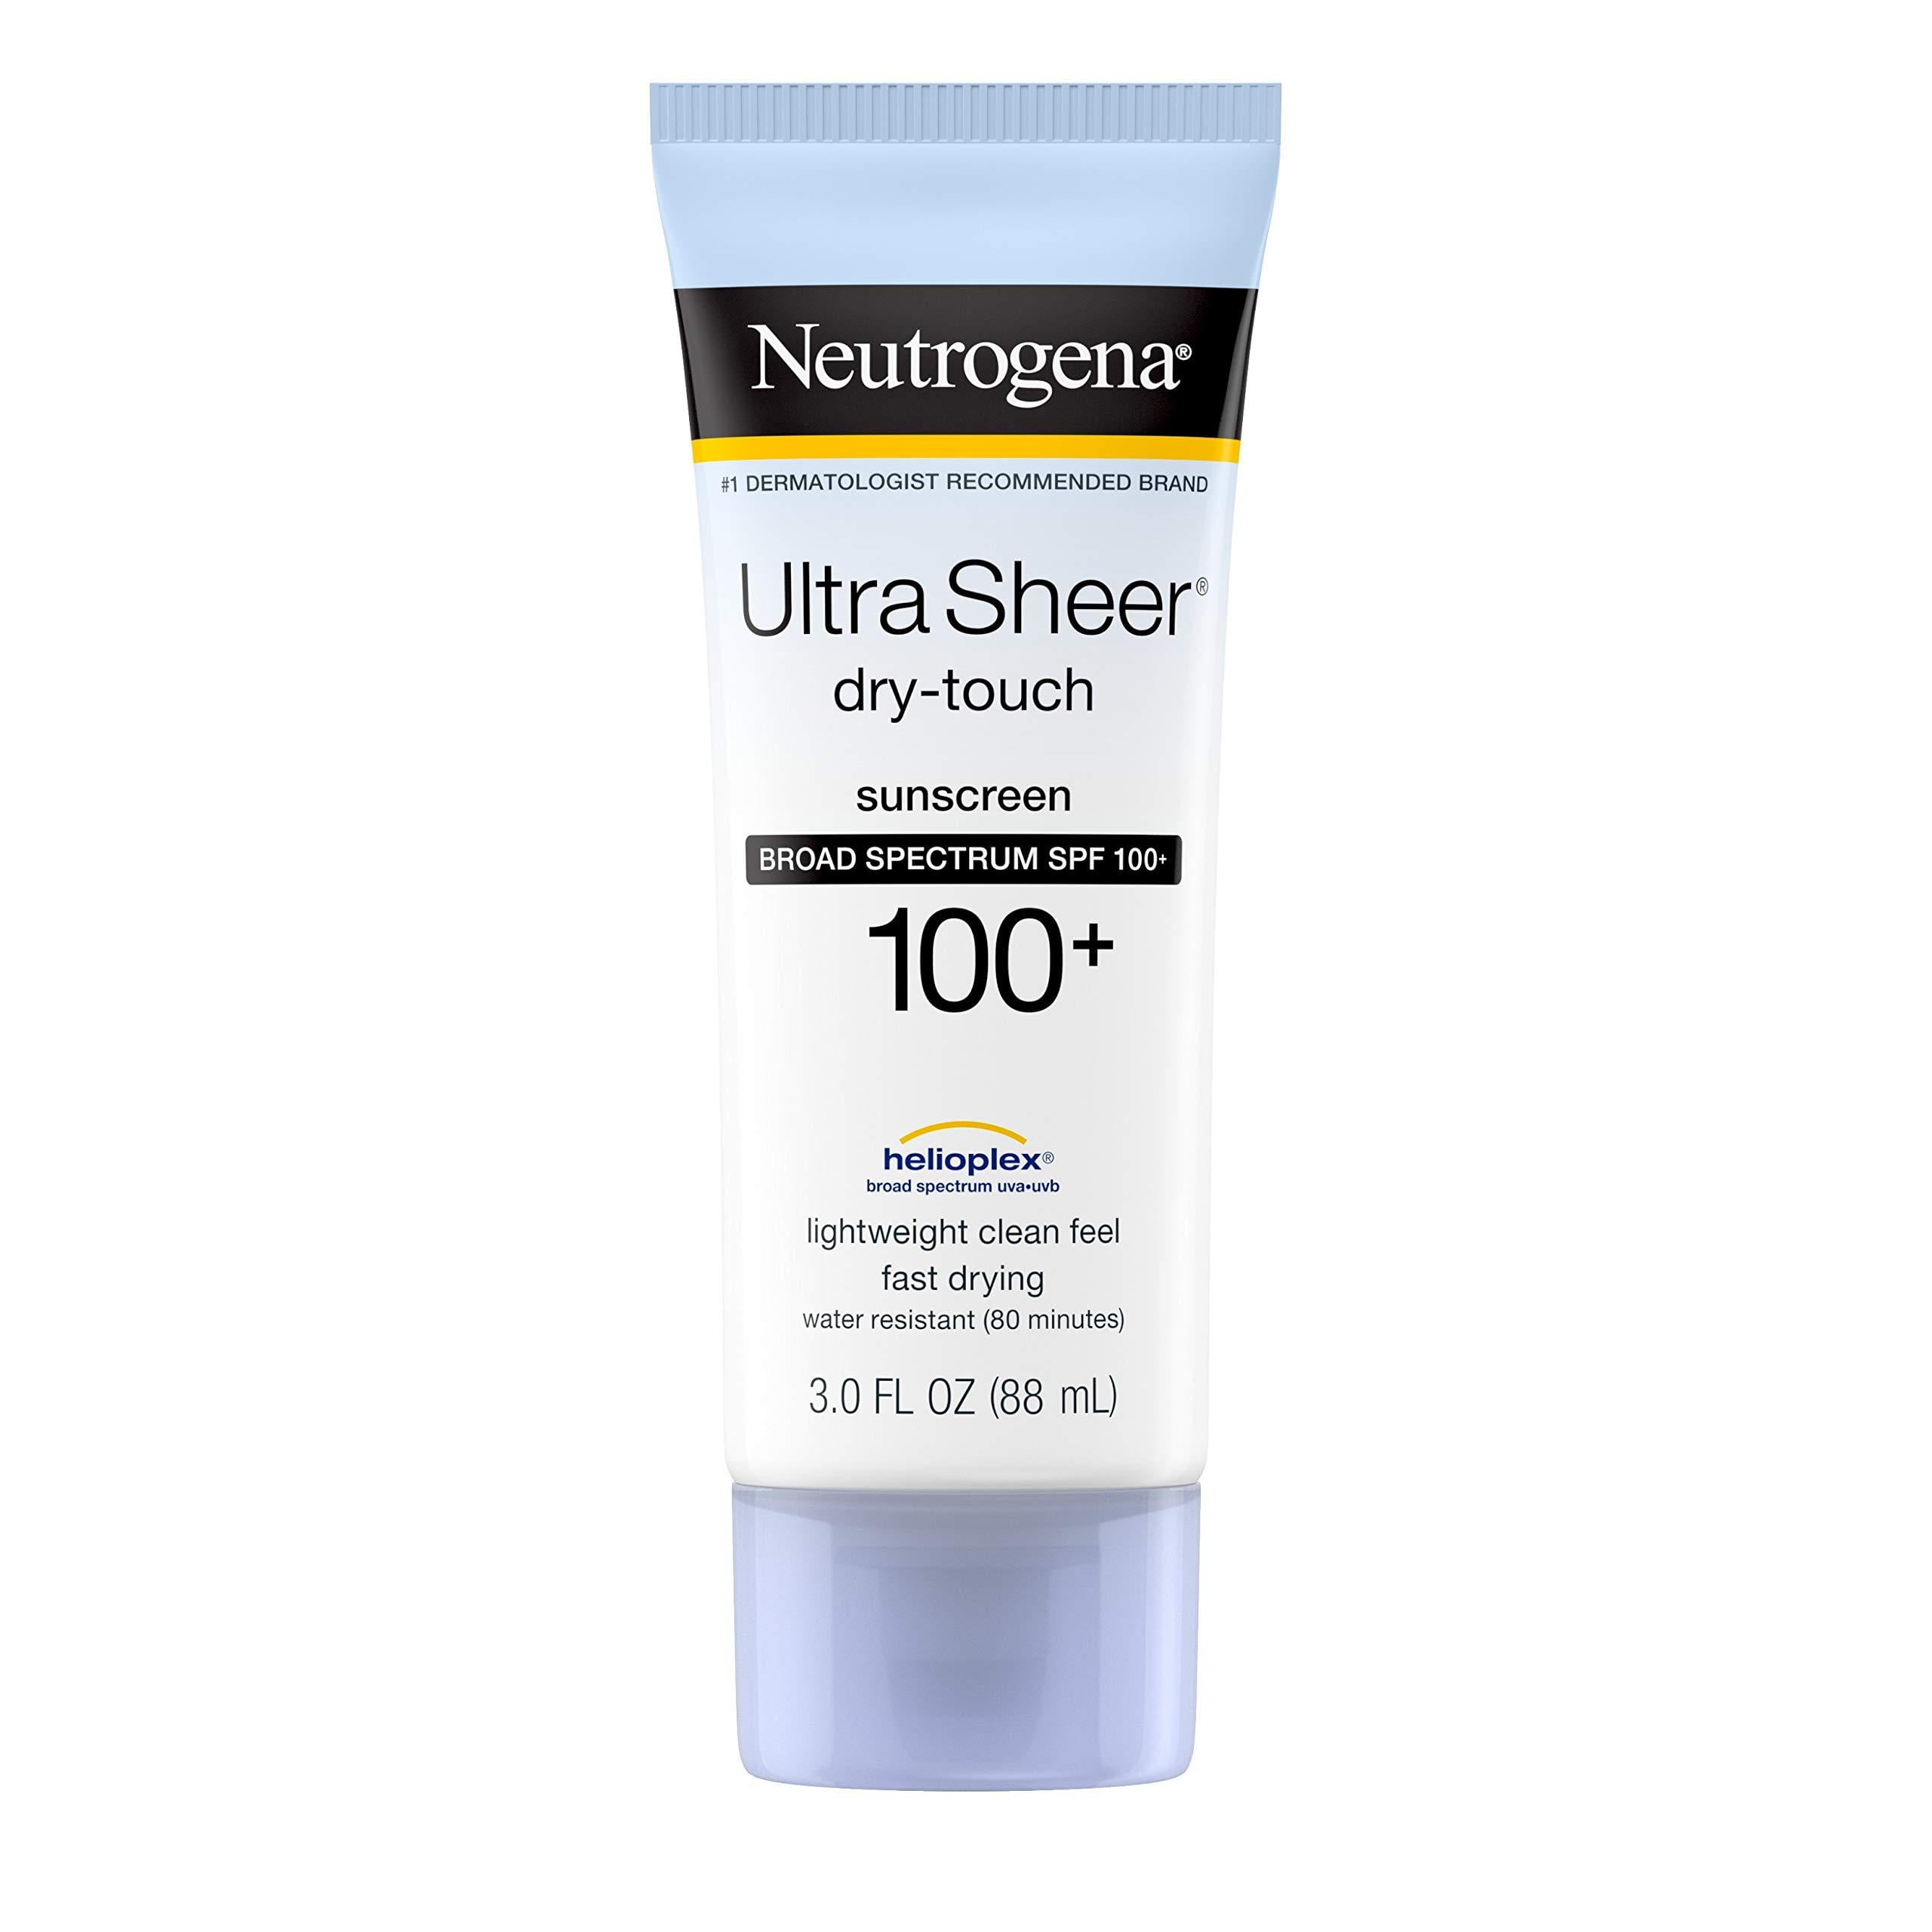 Neutrogena Ultra Sheer Dry-Touch Water Resistant and Non-Greasy Sunscreen Lotion with Broad Spectrum SPF 100+, 3 fl oz